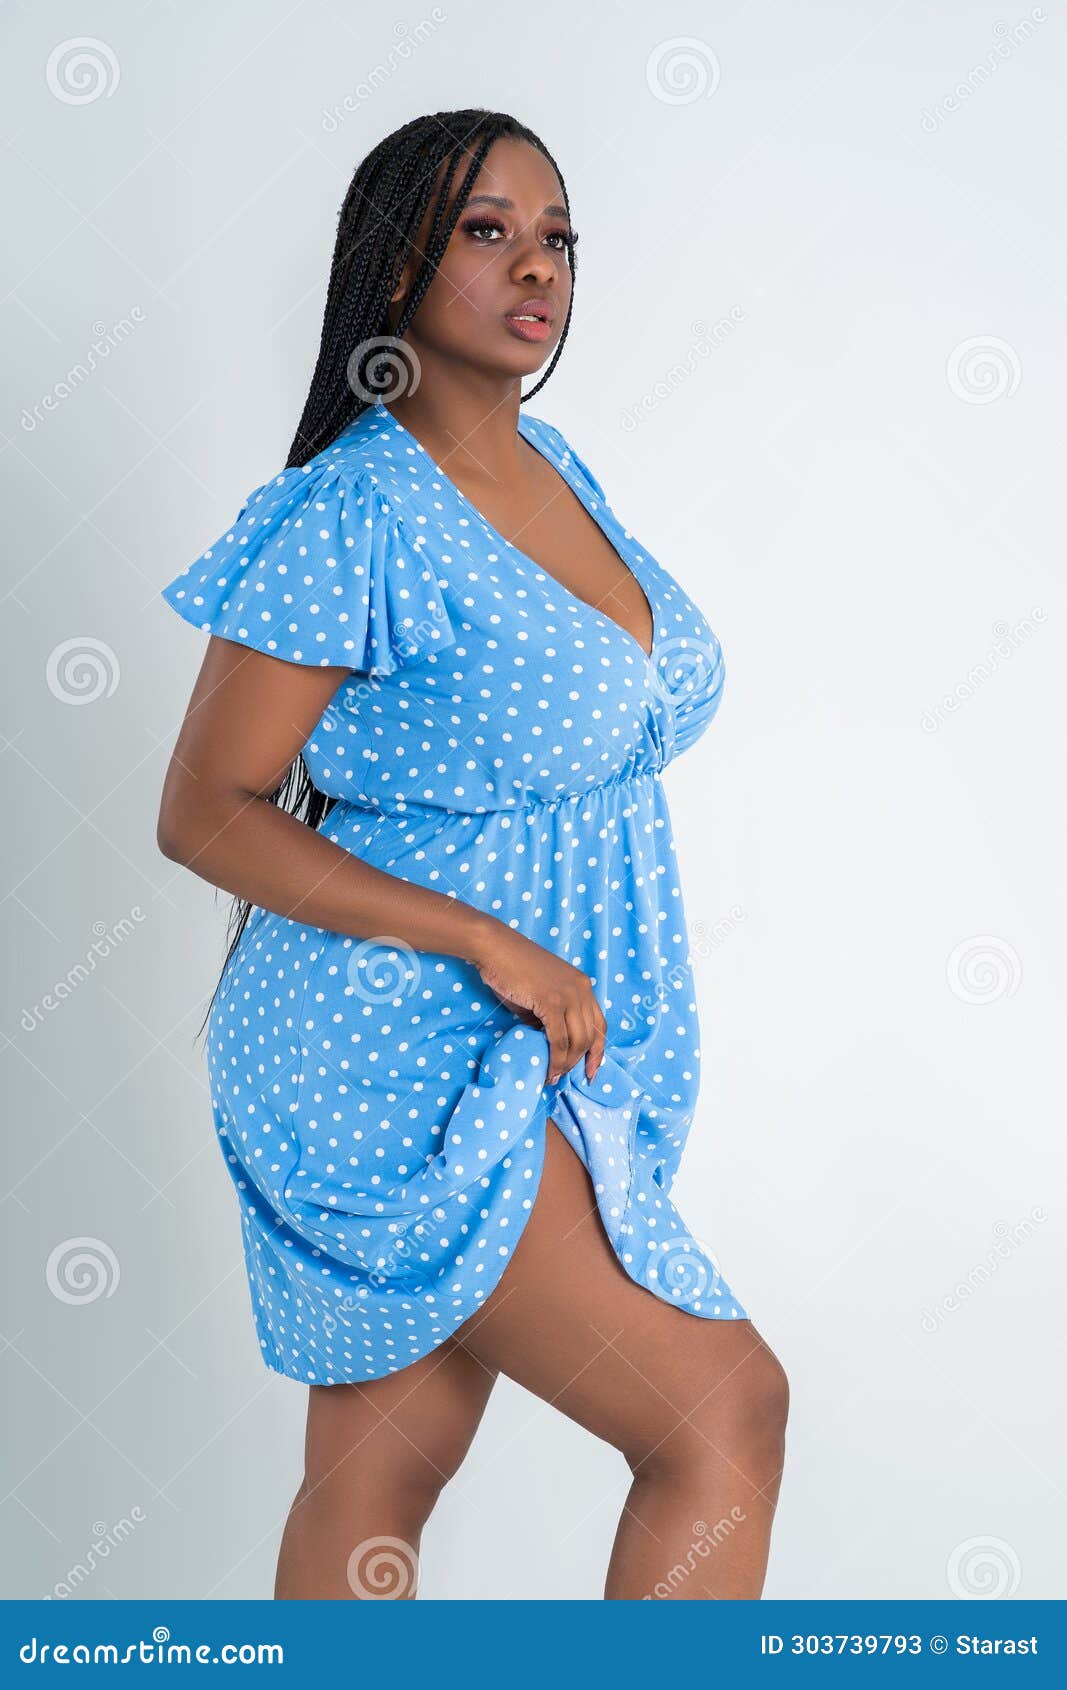 Plus Size Female Model Posing in Blue Dress on White Background, Young  African Woman with Curvy Figure and Pigtailed Hairstyle, Stock Image -  Image of breast, braid: 303739793